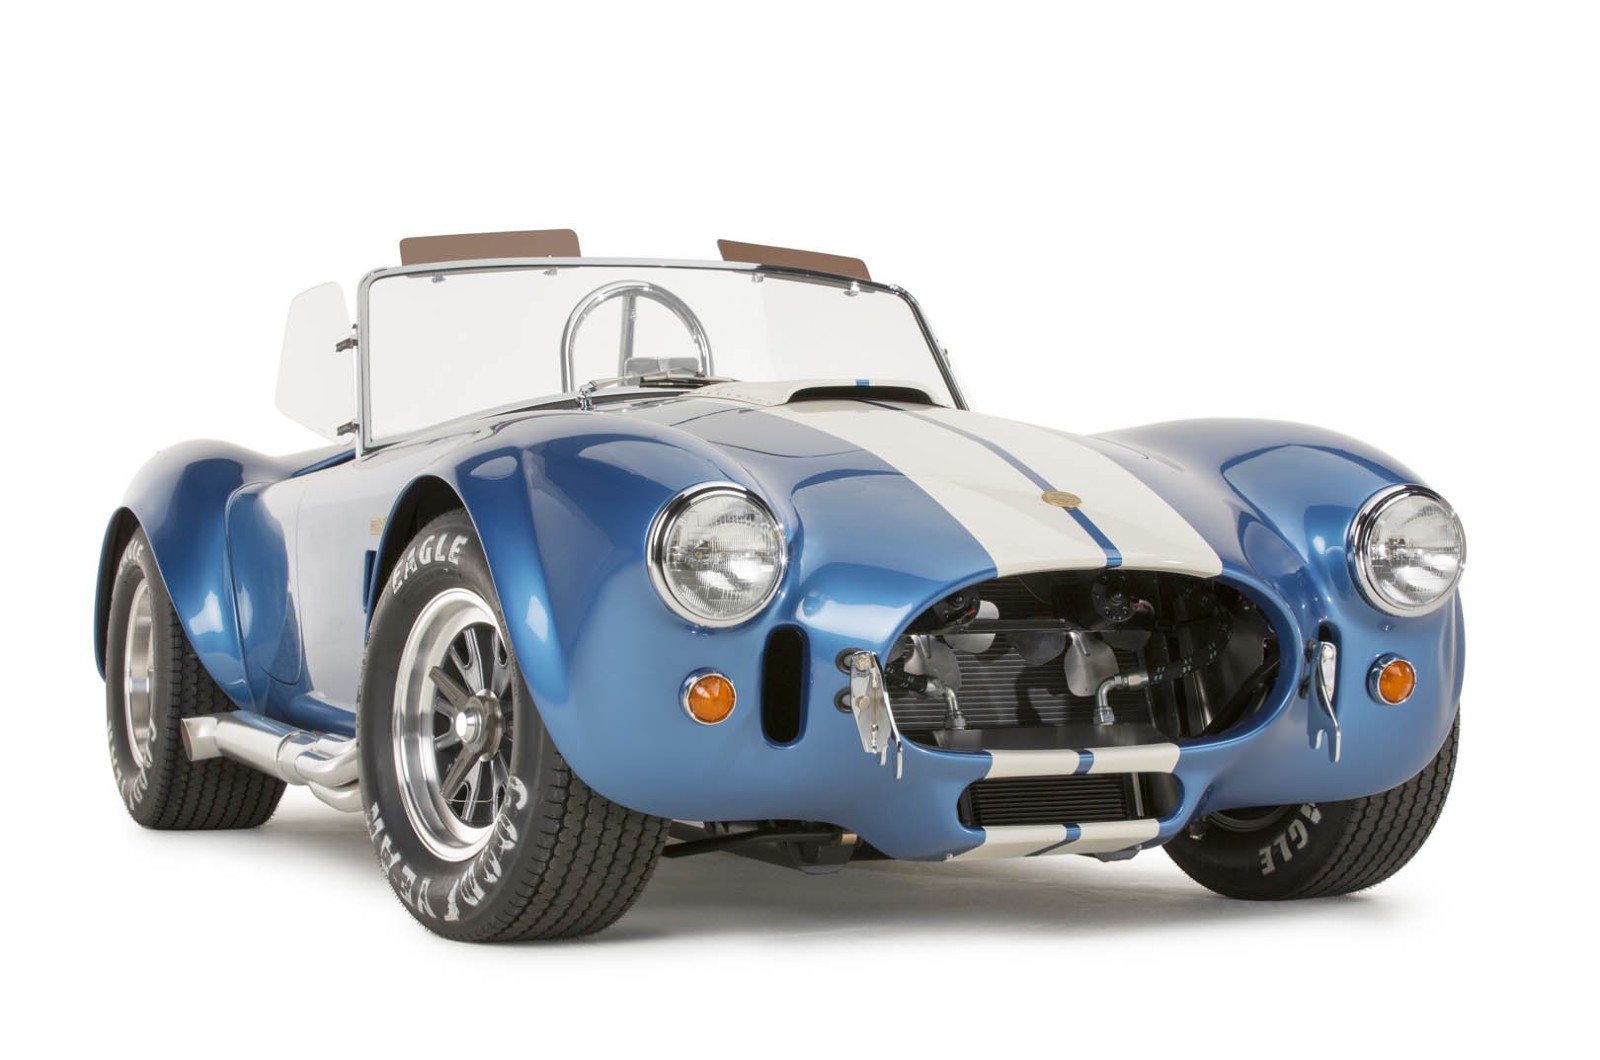 <p>Get ready to see Carroll Shelby’s name quite a bit on this list. The Texas chicken farmer turned car producer had the single greatest contribution to American racing, and the Cobra was his first big hit.</p><p>In 1964, the Shelby Cobra achieved a remarkable 1-2-3 finish at the Sebring race, a testament to the car’s incredible design. The Cobra also played a significant role in American racing history by daring to compete internationally, marking the first serious attempt of an American car to win the FIA World Manufacturers Championship.</p>